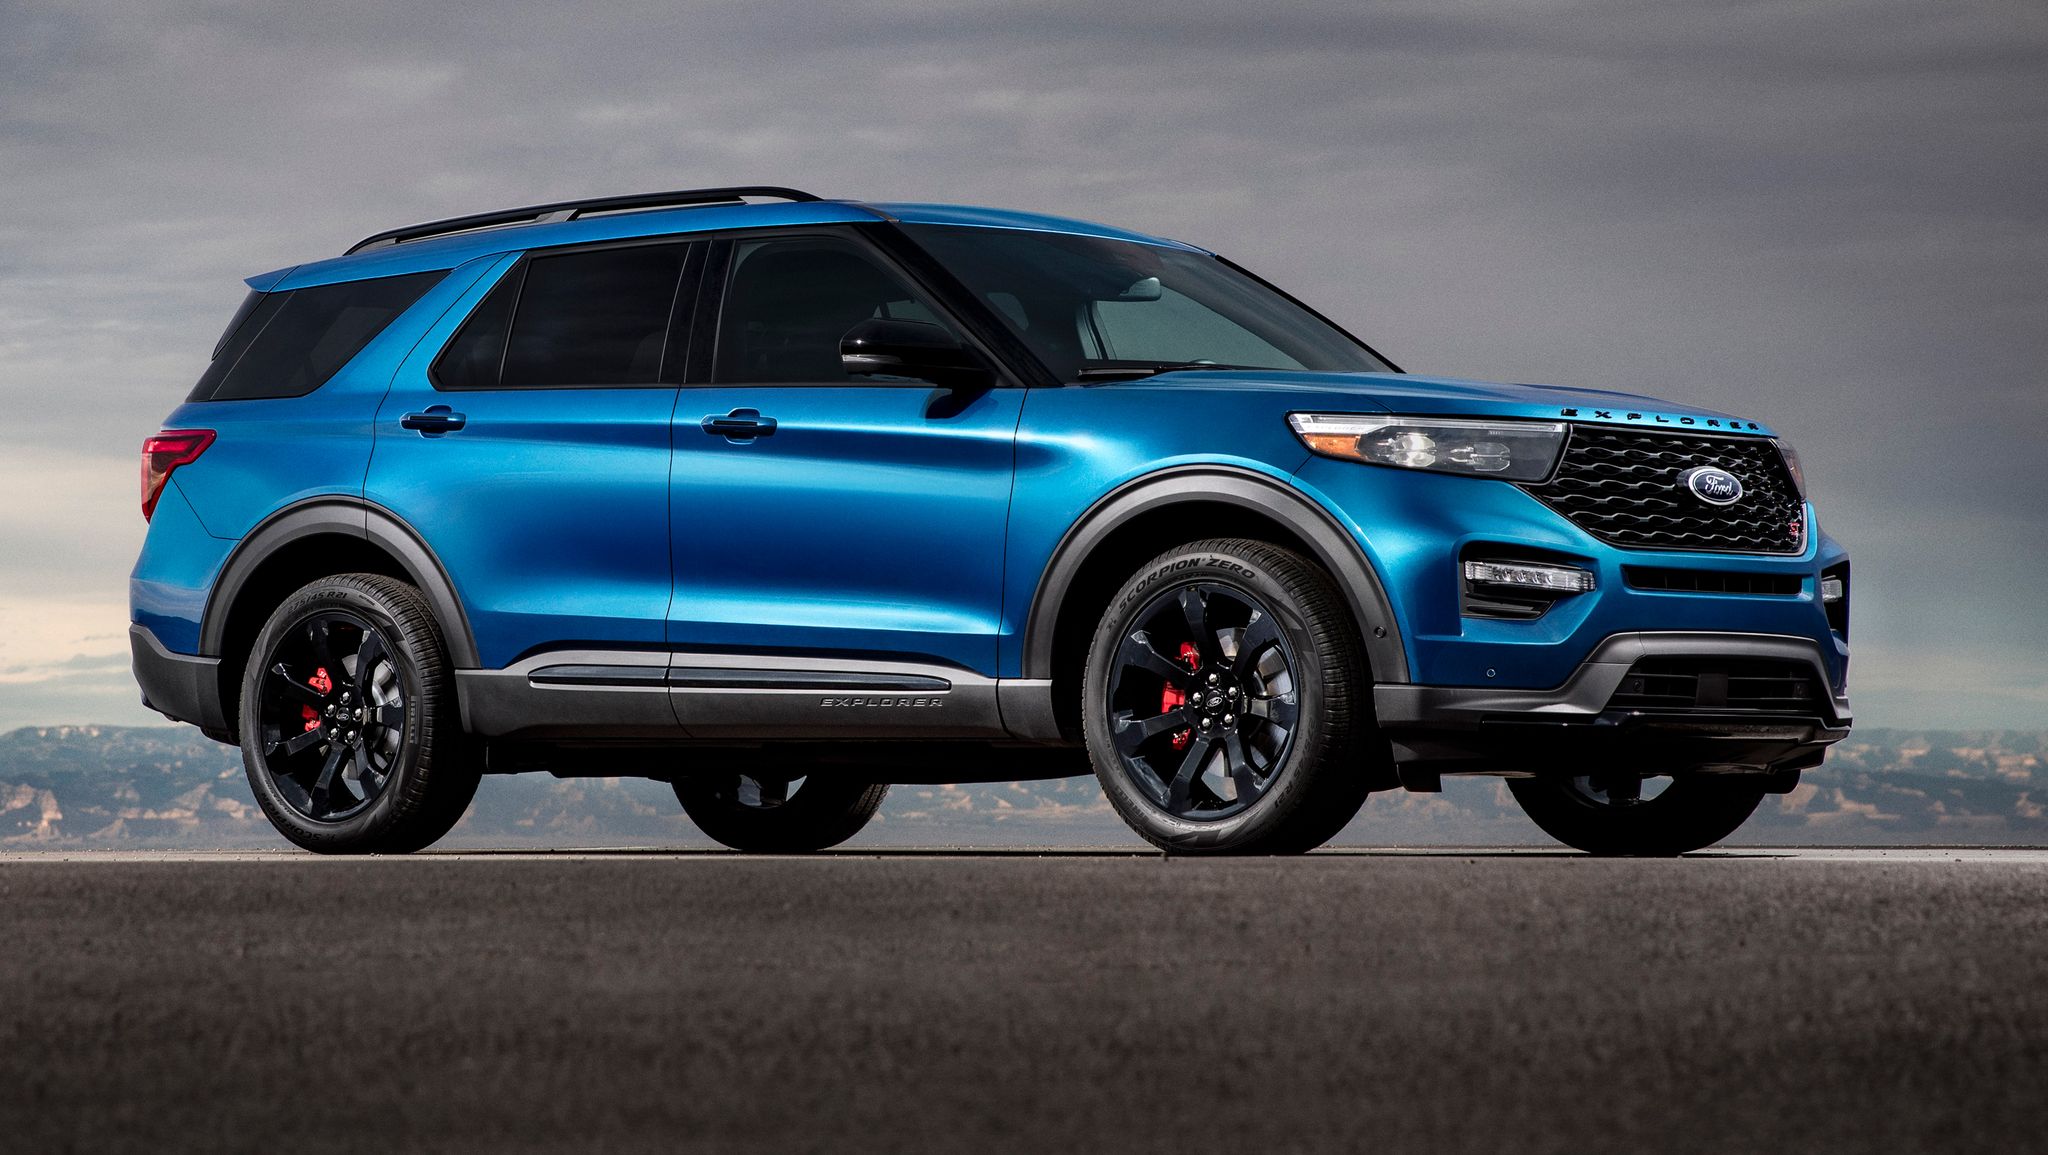 5 Best Features of the 2021 Ford Explorer